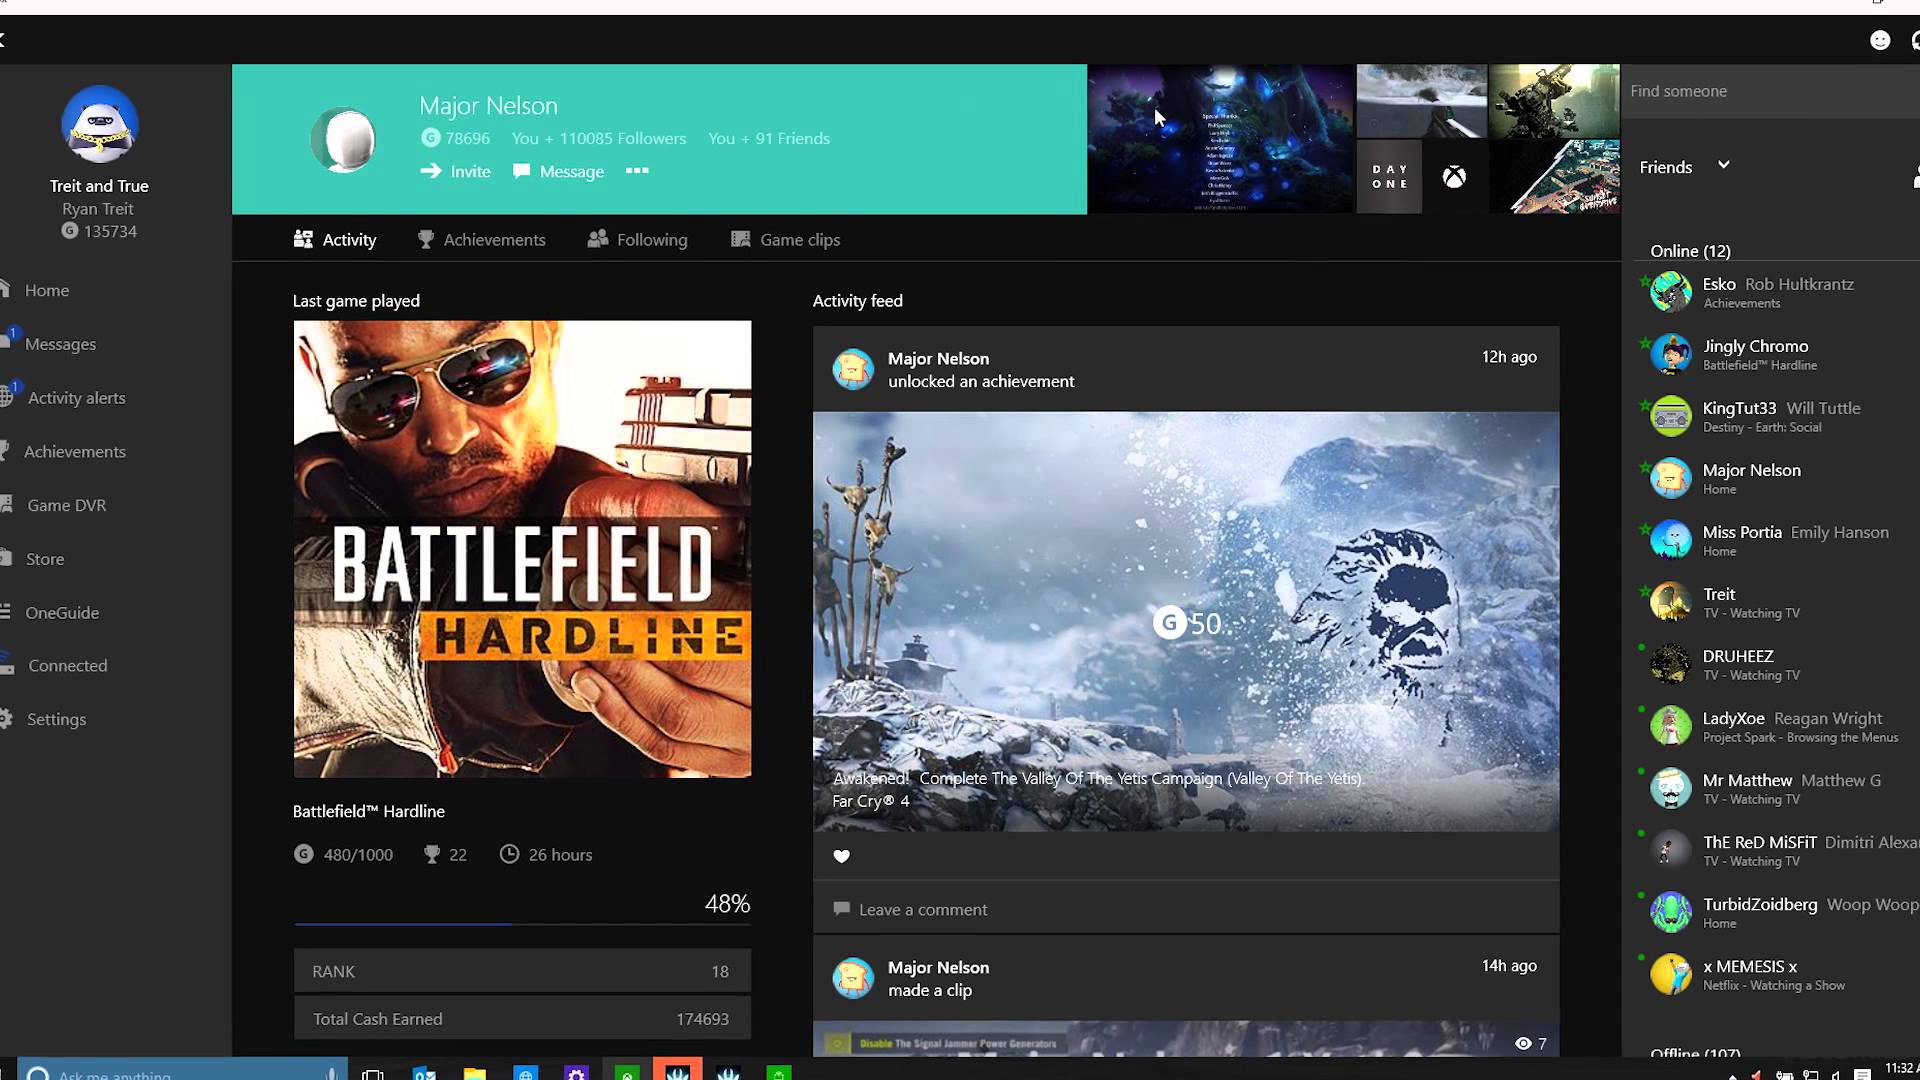 New Features In Preview For Xbox App On Windows 10 And Xbox One